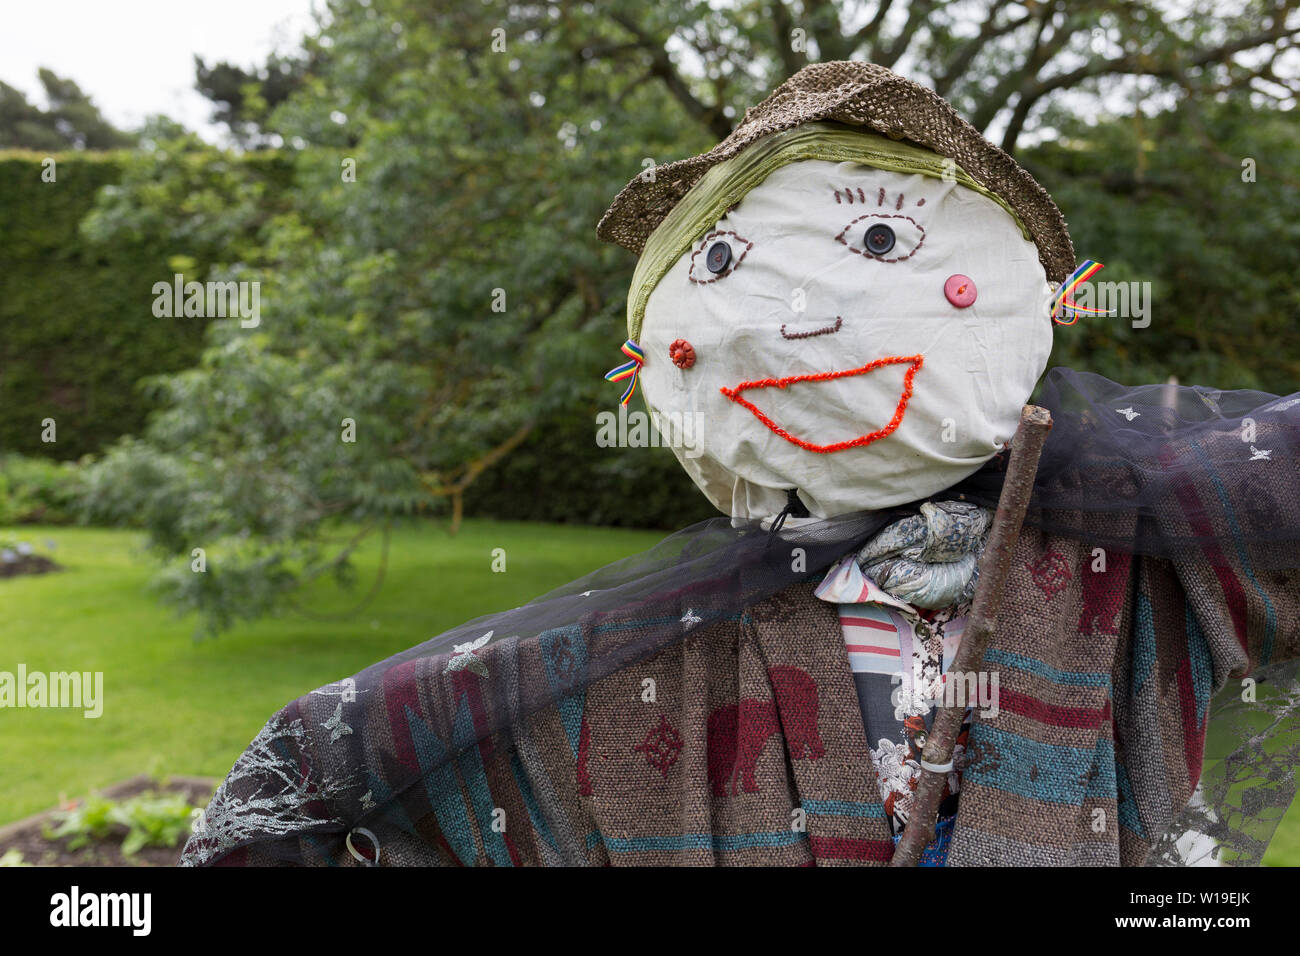 The face of an embroidered scarecrow in a garden at the Royal Botanical Gardens in Edinburgh, on 26th June 2019, in Edinburgh, Scotland. The Royal Botanic Garden Edinburgh (RBGE) is a scientific centre for the study of plants, their diversity and conservation, it was founded in 1670 as a physic garden to grow medicinal plants. Stock Photo